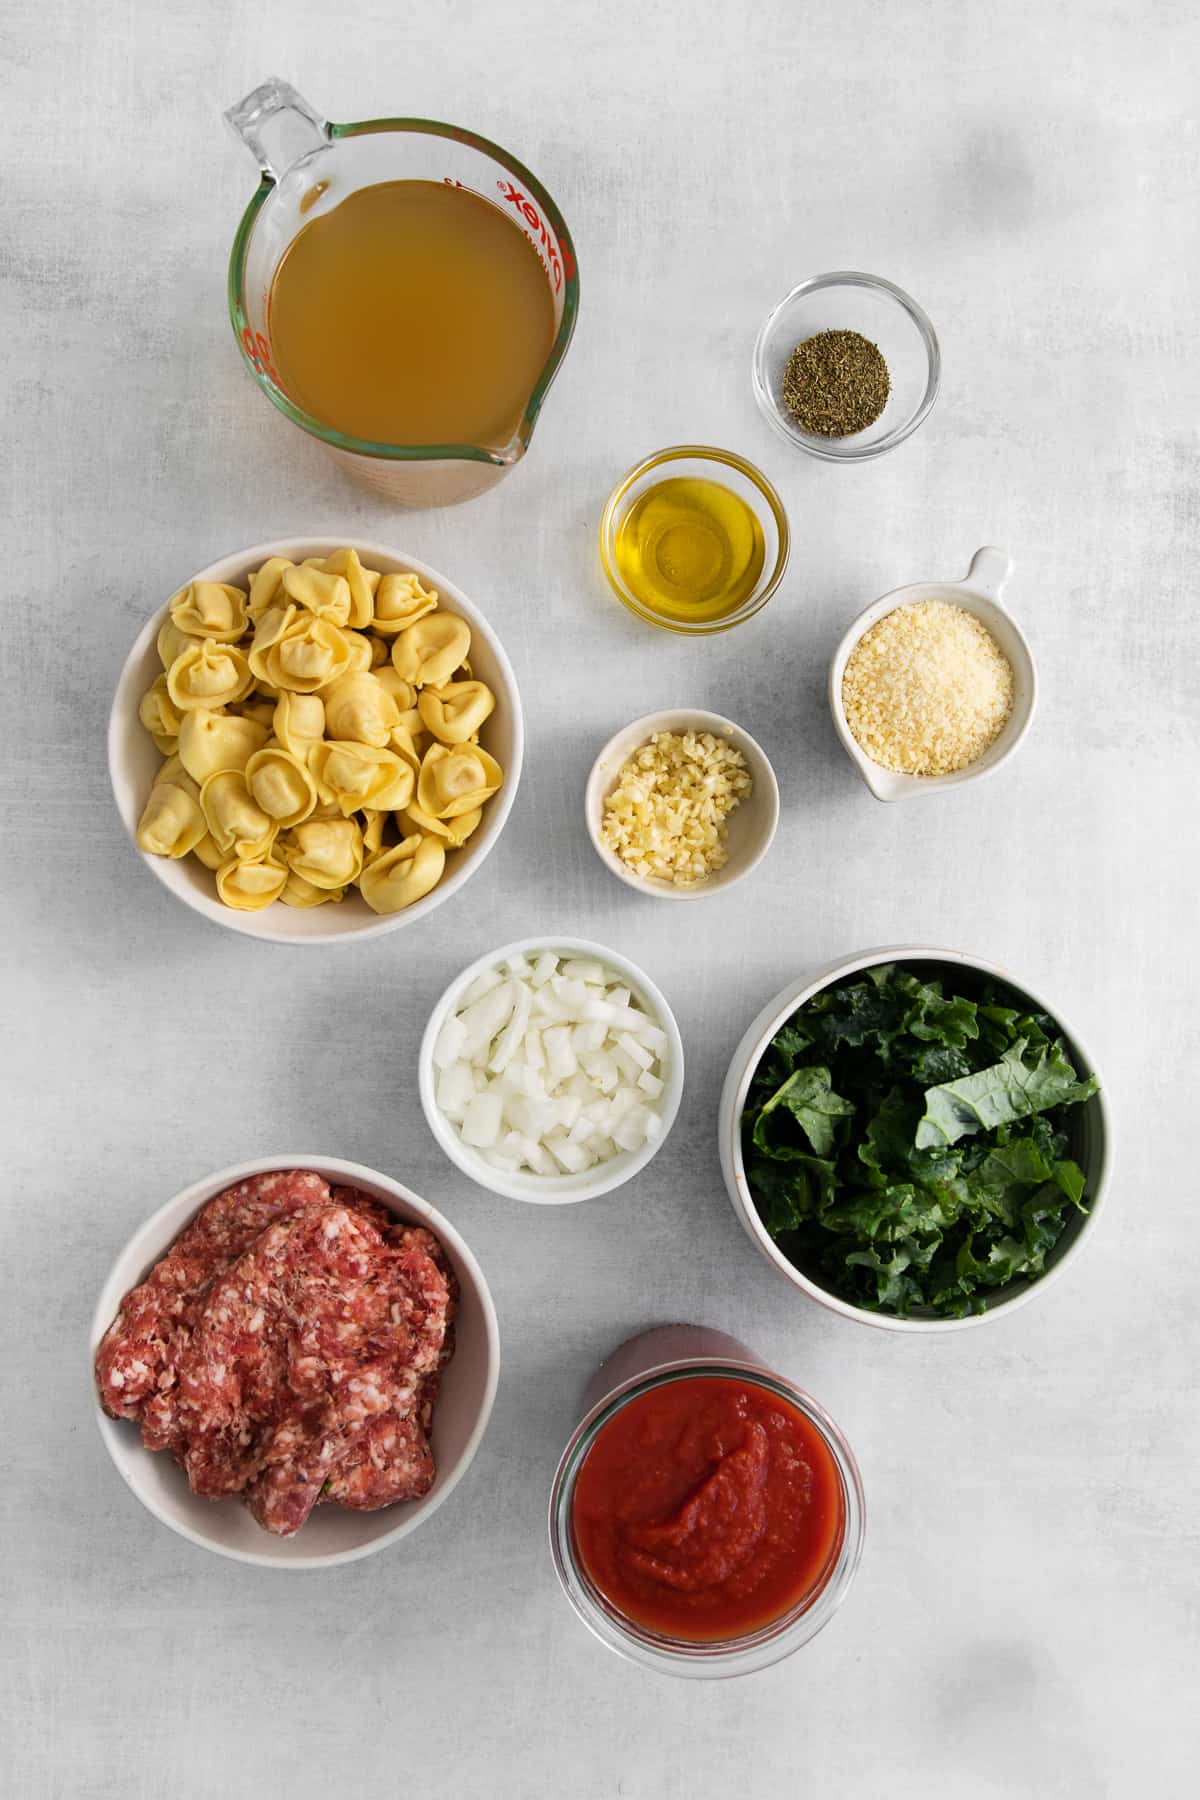 Cheese tortellini soup ingredients in bowls.